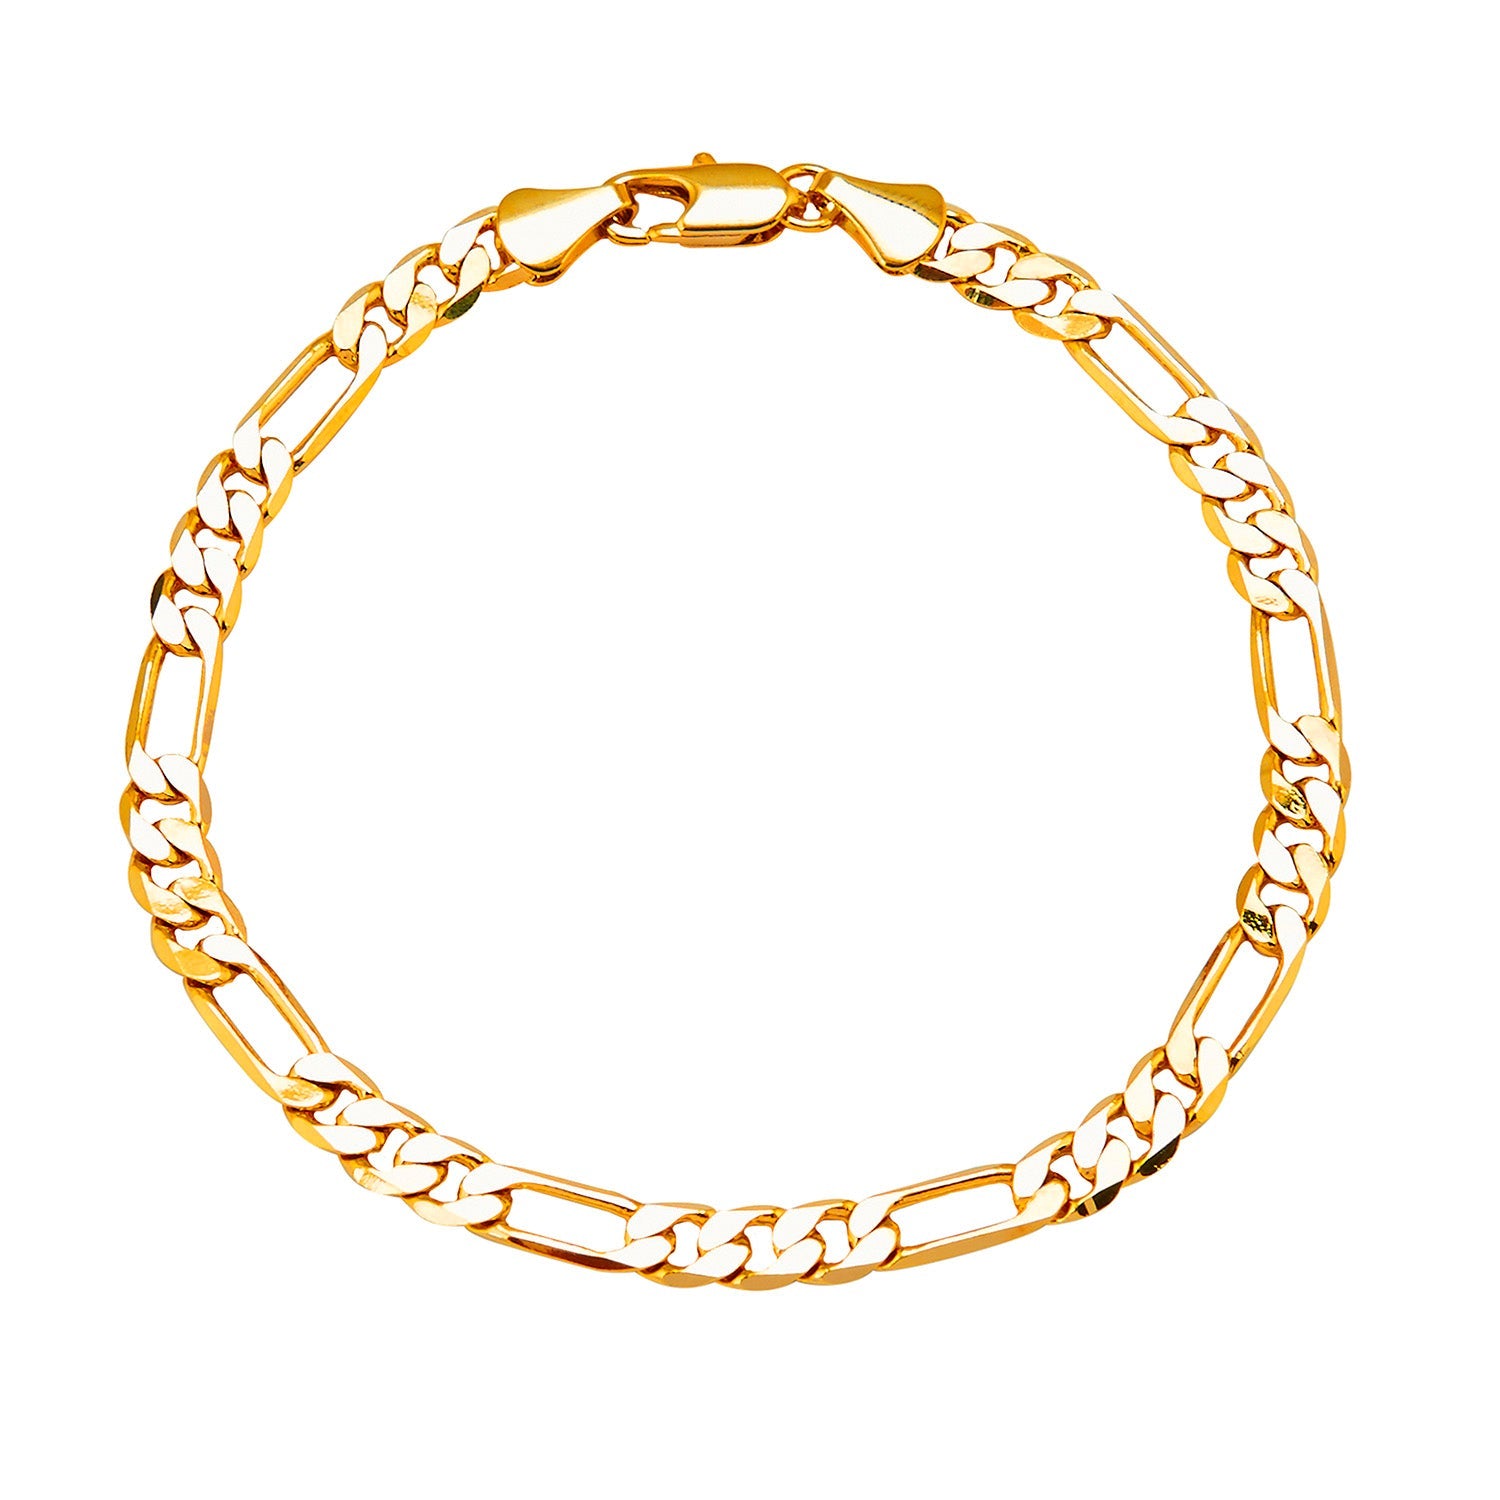 Buy 14K Solid Yellow Gold Figaro Link Chain Bracelet 19 to 7mm Online in  India  Etsy